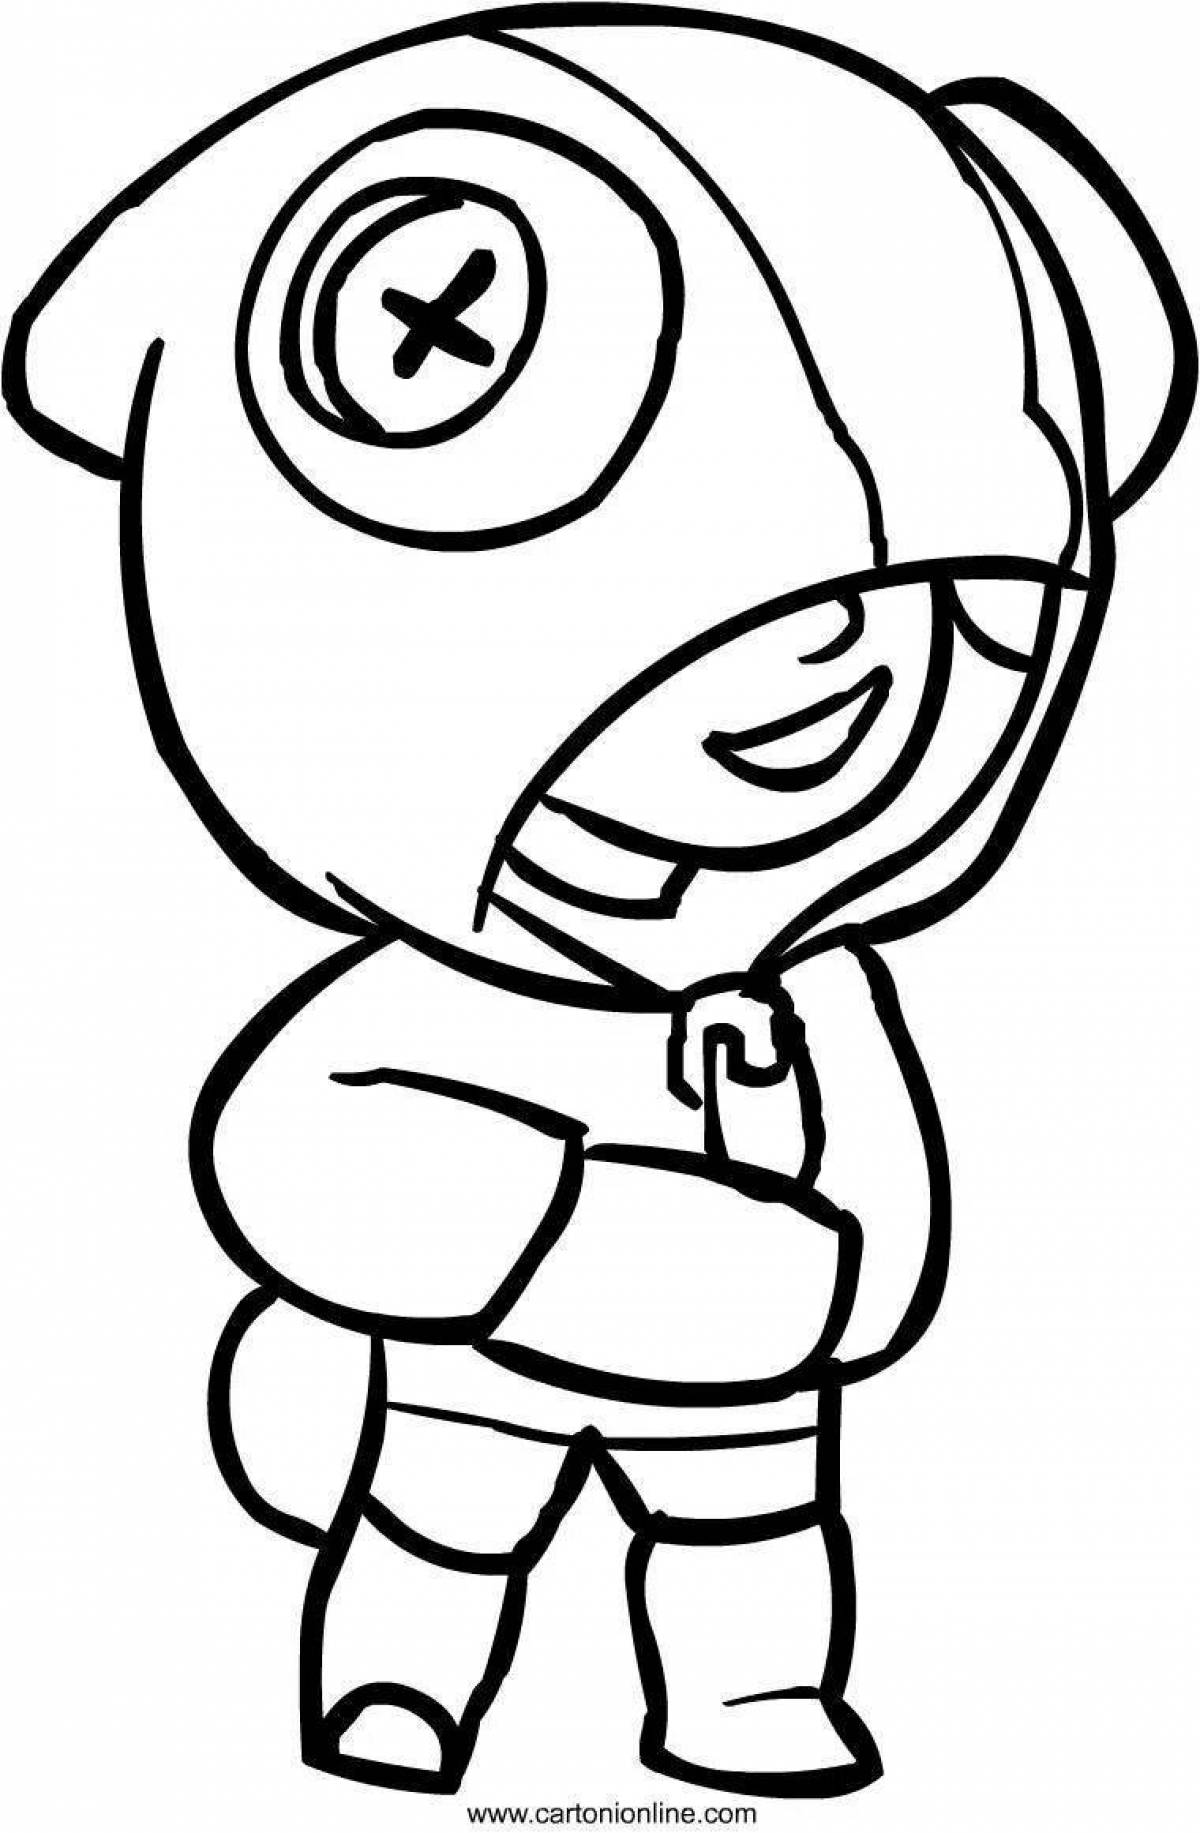 Radiant coloring page brawl stars for boys